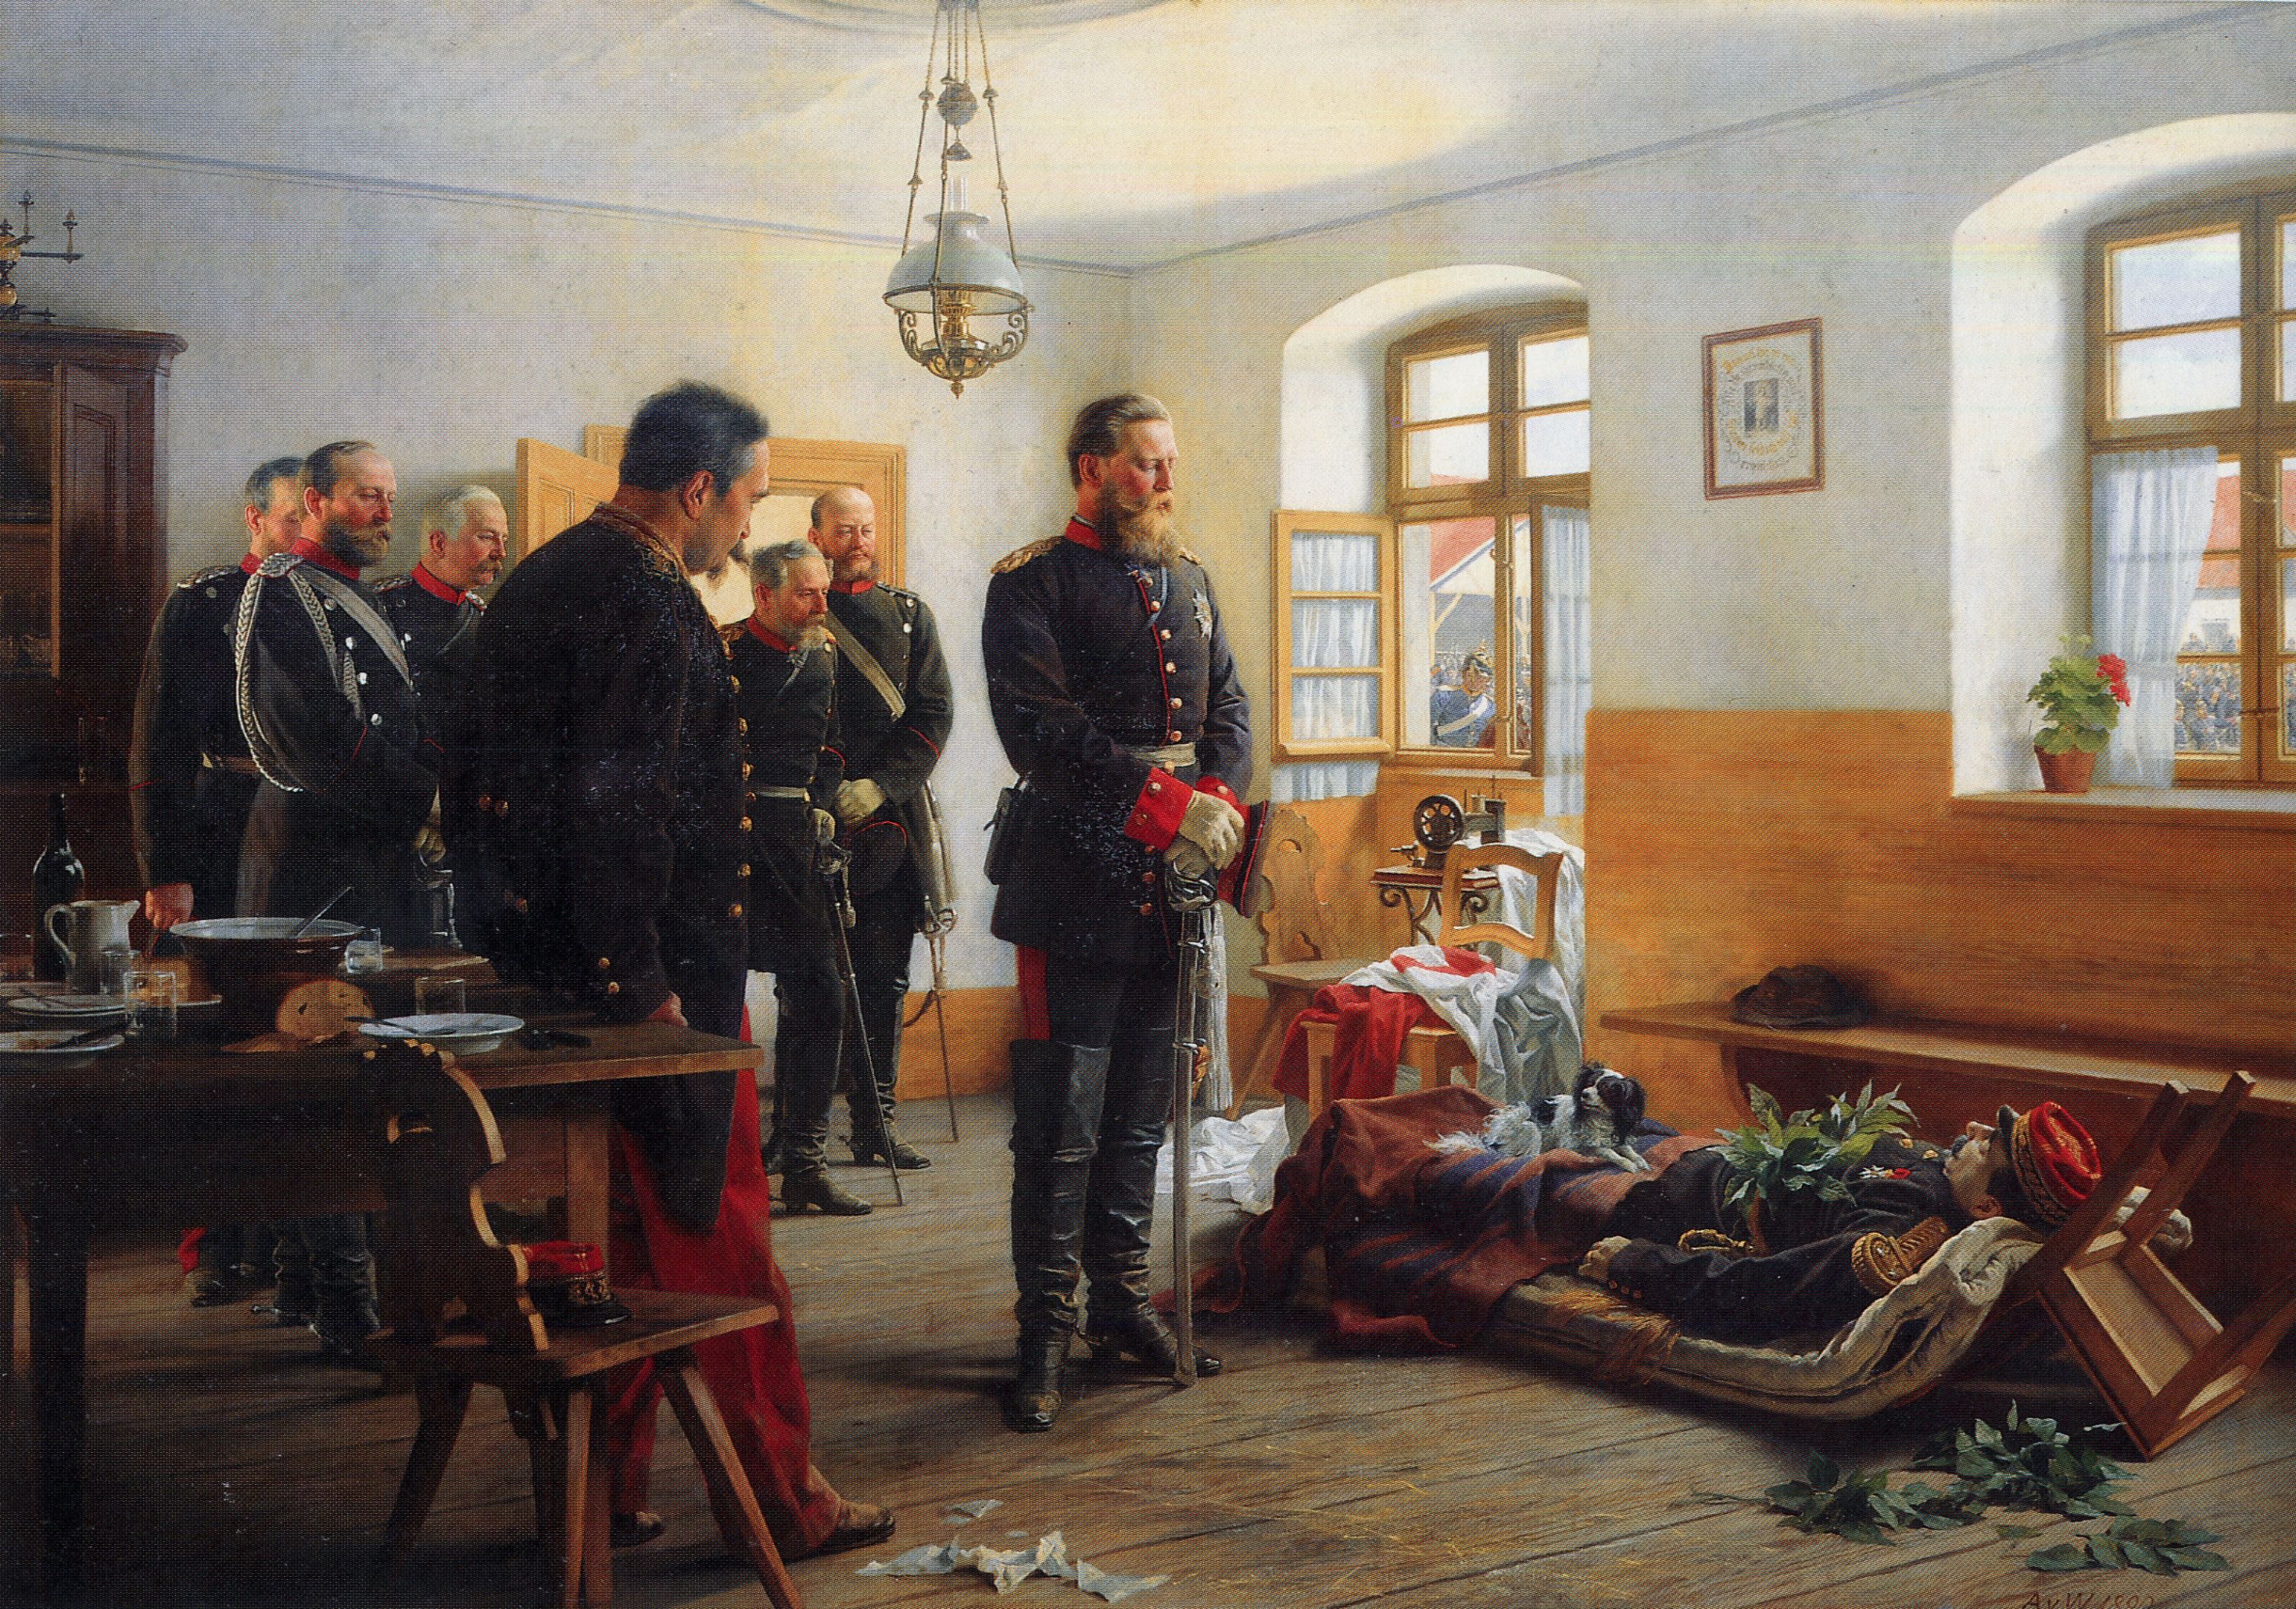 General 3000x2102 classic art Europe Anton von Werner 1888 German crown Prince Friedrich Wilhelm contemplating the corpse of French general Abel Douay, Franco-Prussian War, 1870  1888 (Year) painting death Franco-Prussian War French Army Prussia